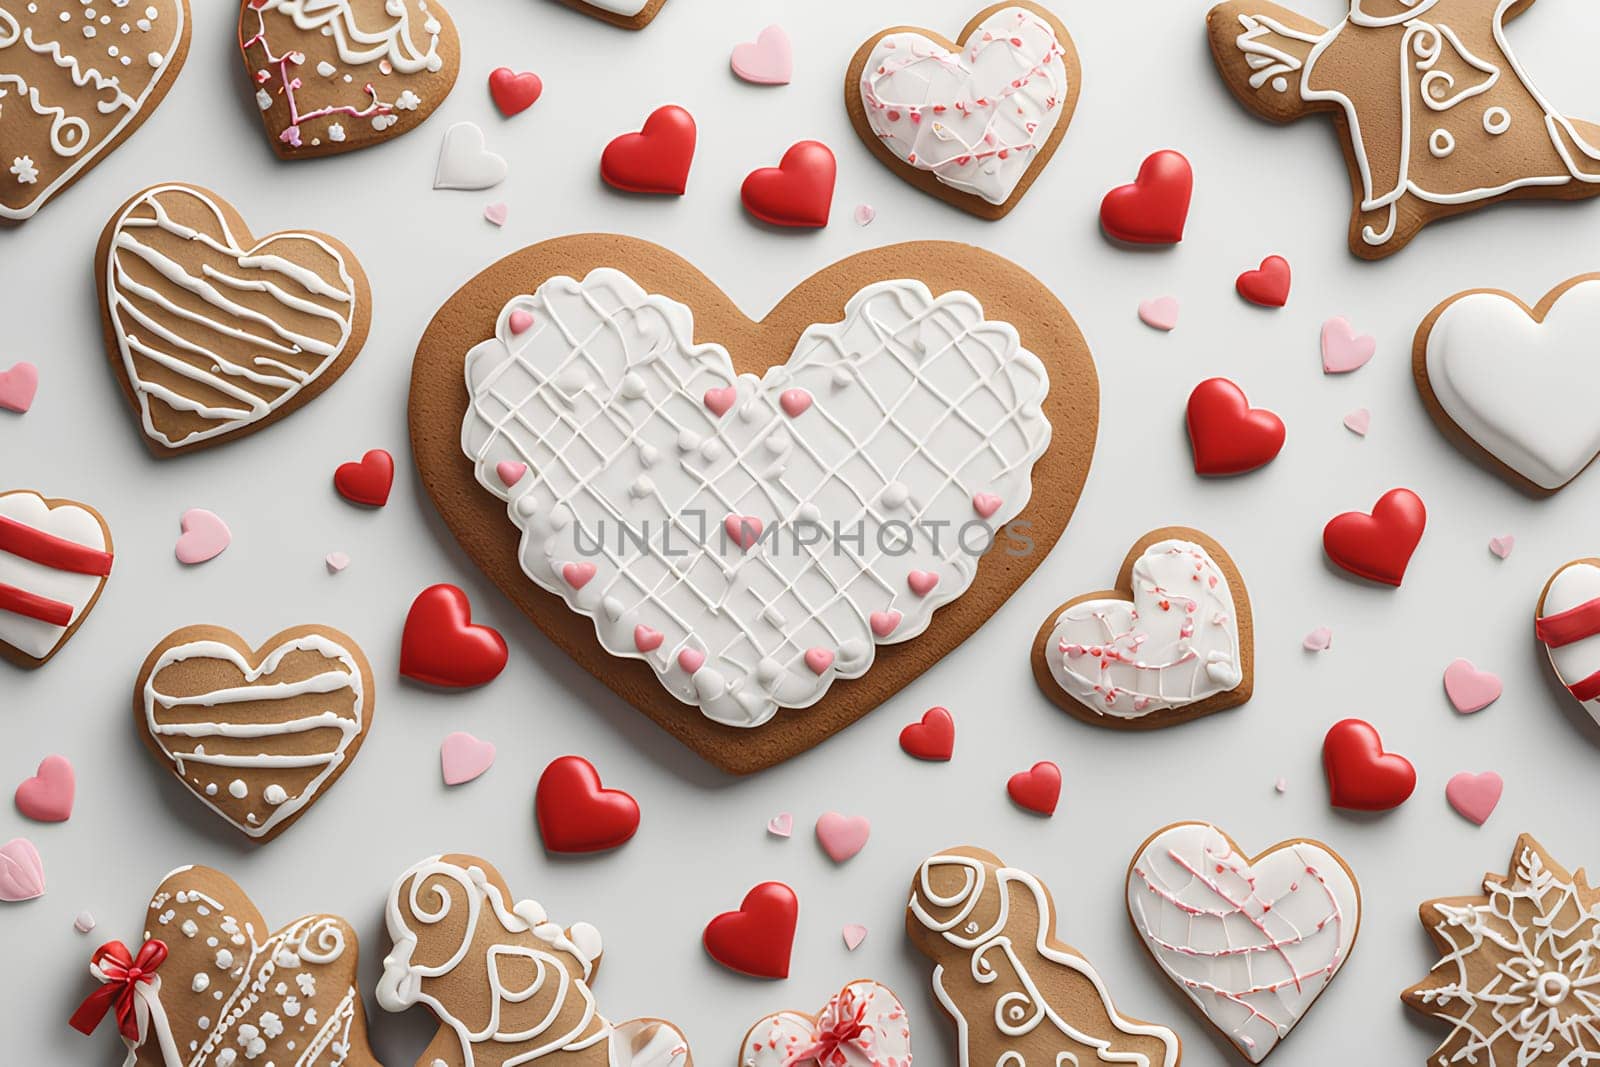 Gingerbread in the shape of a heart for Valentine's Day. by Annu1tochka